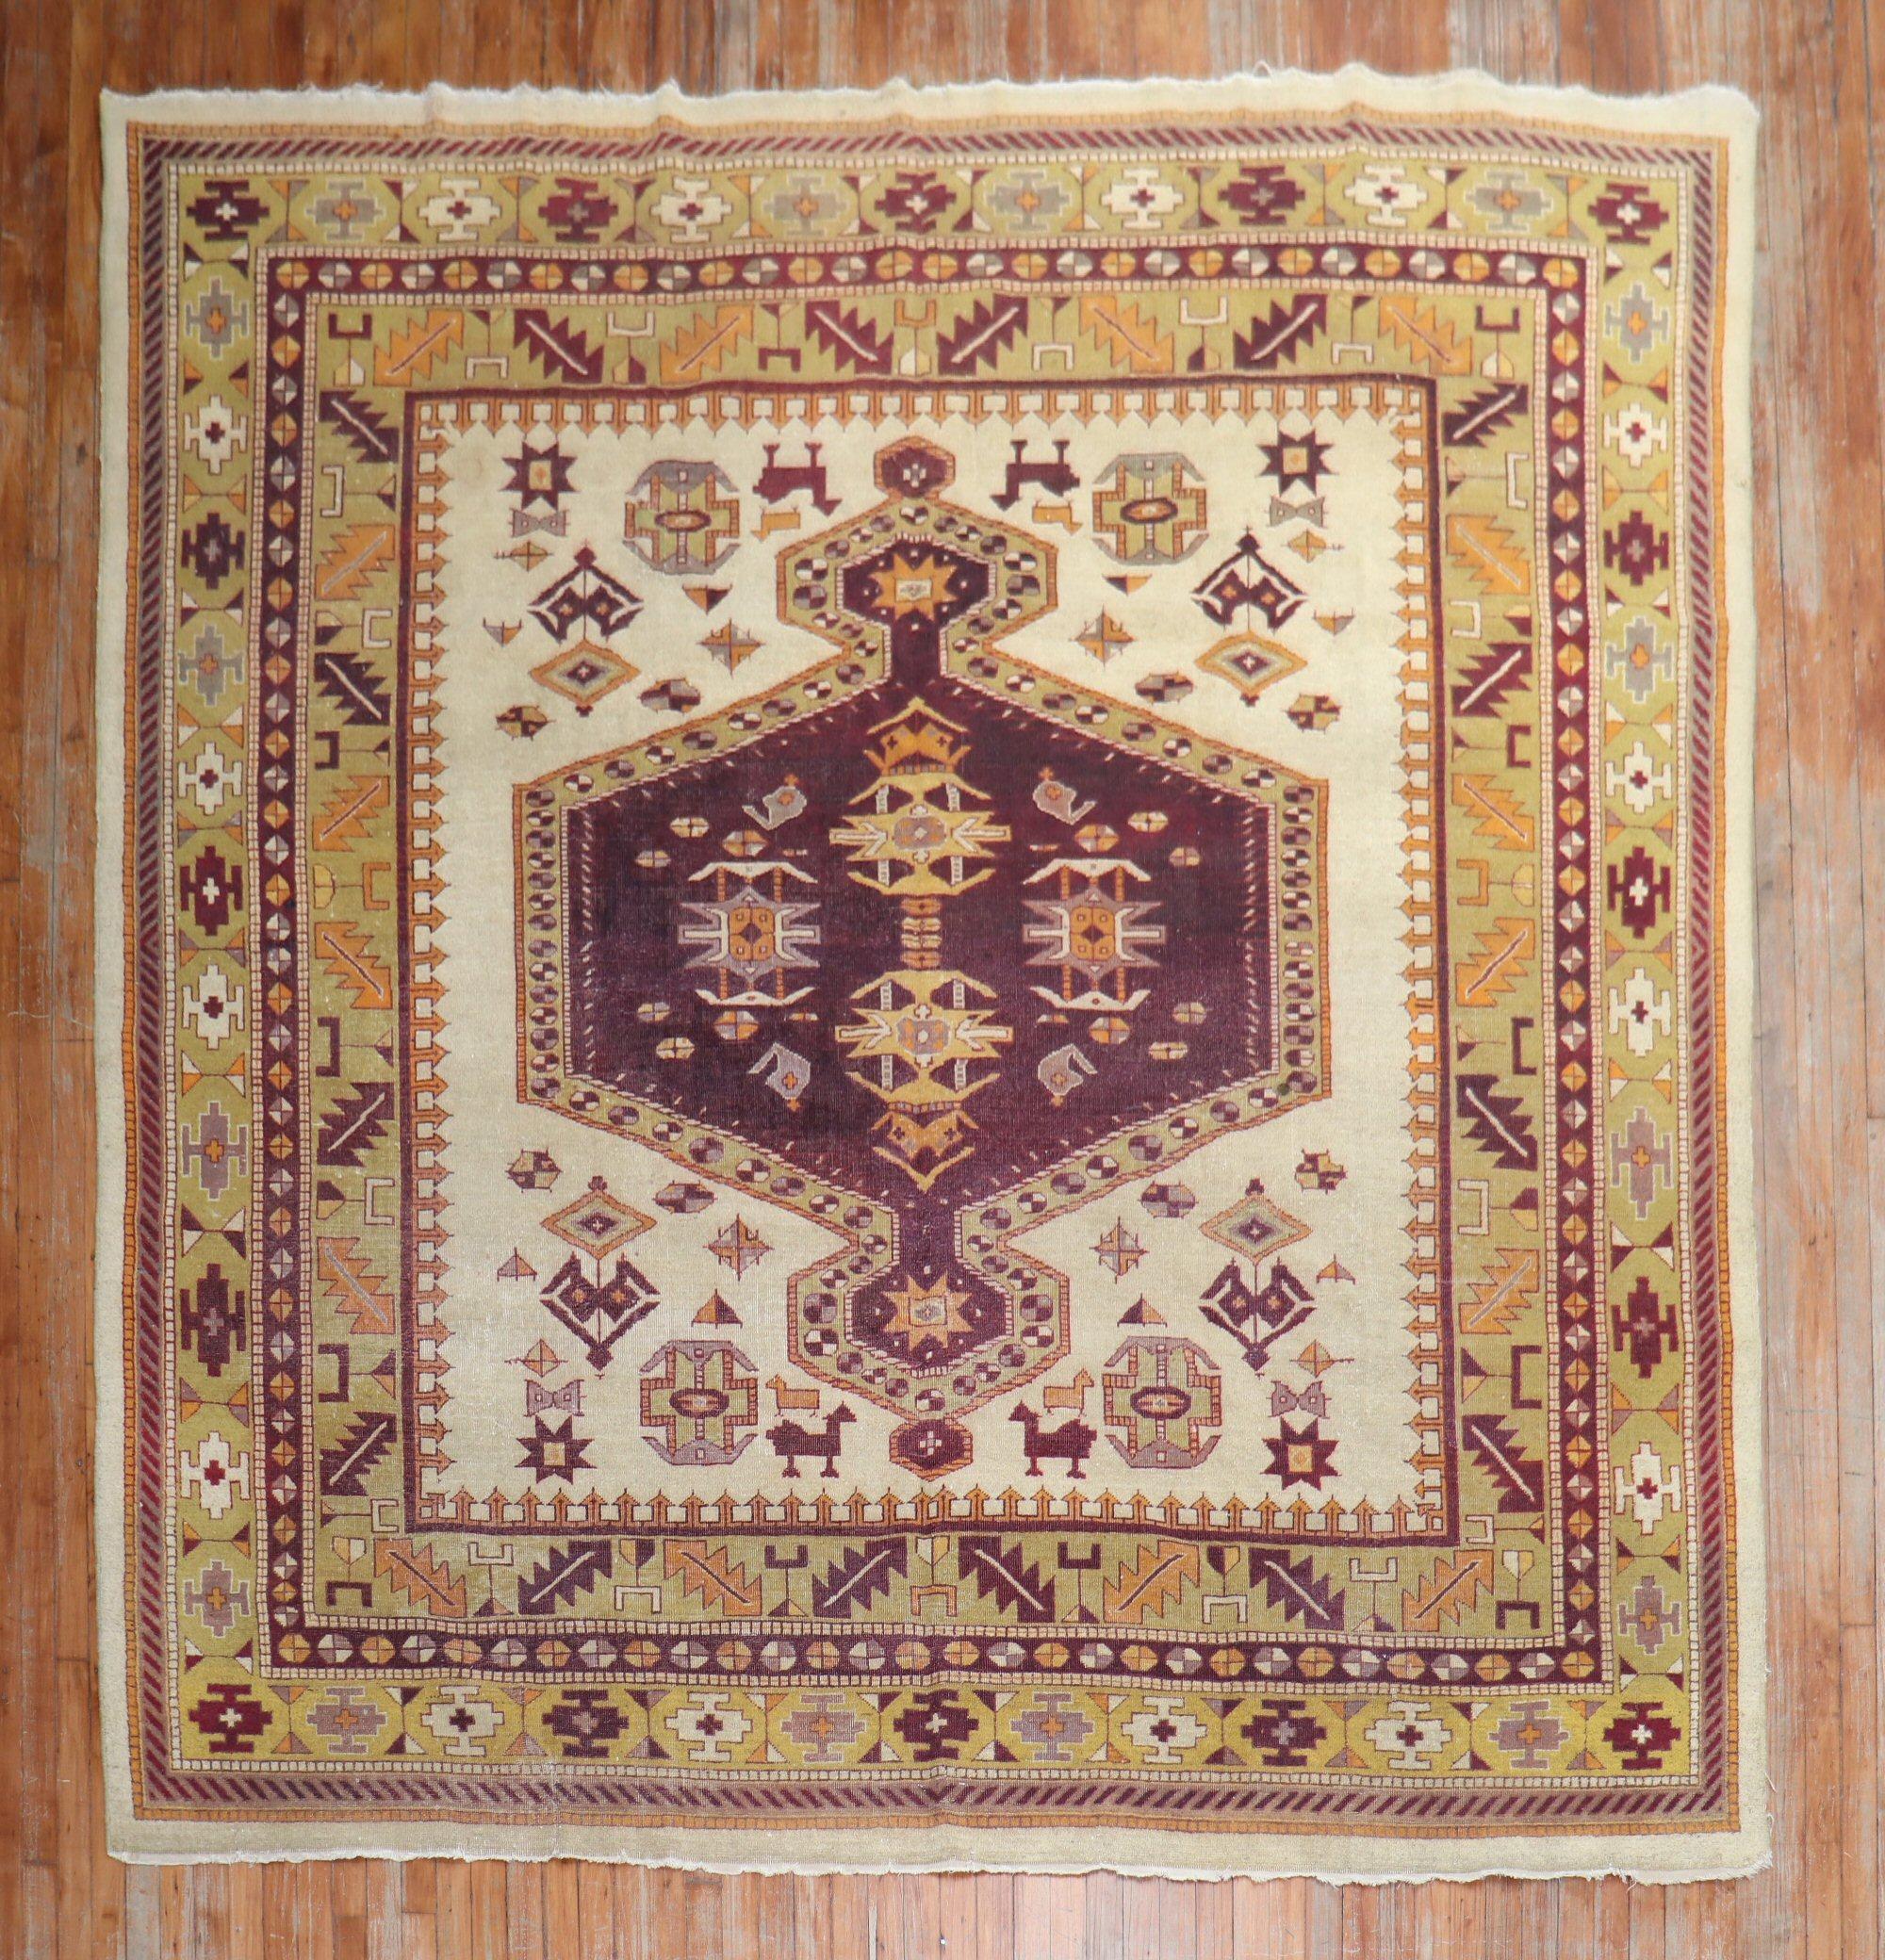 High decorative room square size early 20th century antique Indian Amritsar rug from the early 20th century. Pea Green, burgundy, bronze accents on a beige field

circa 1900-1910. Measures: 8'10'' x9'6